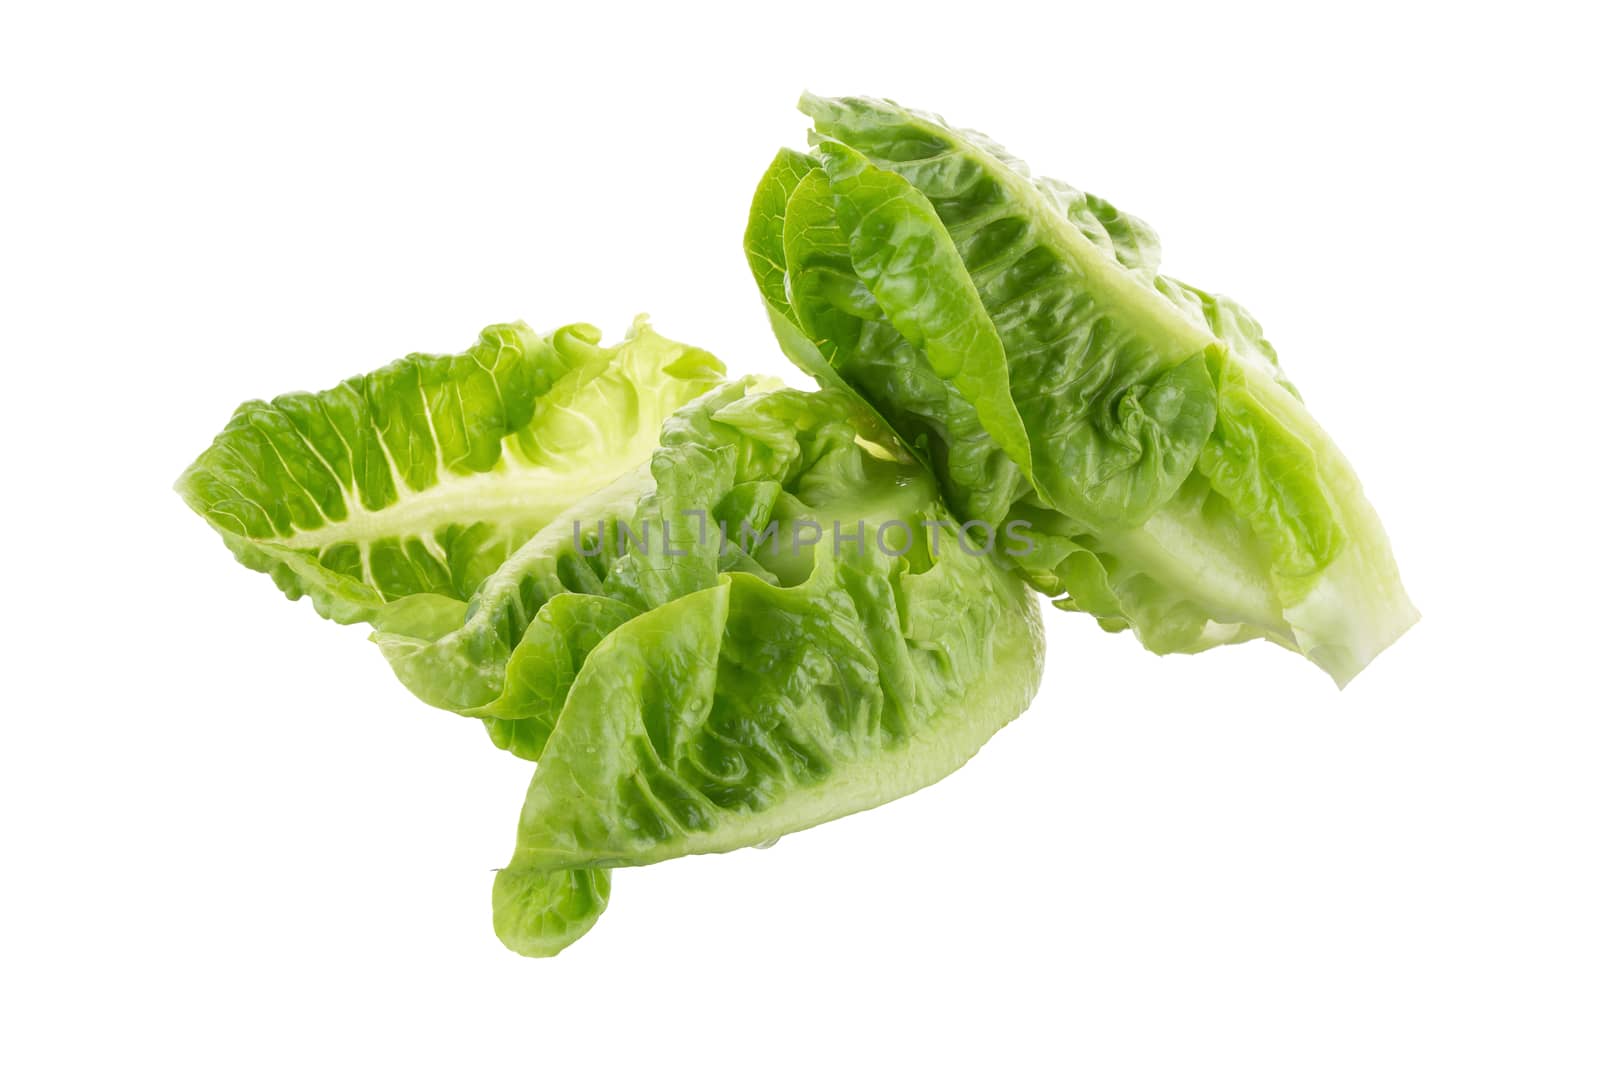 Fresh green cos lettuce Isolated on White Background by kaiskynet